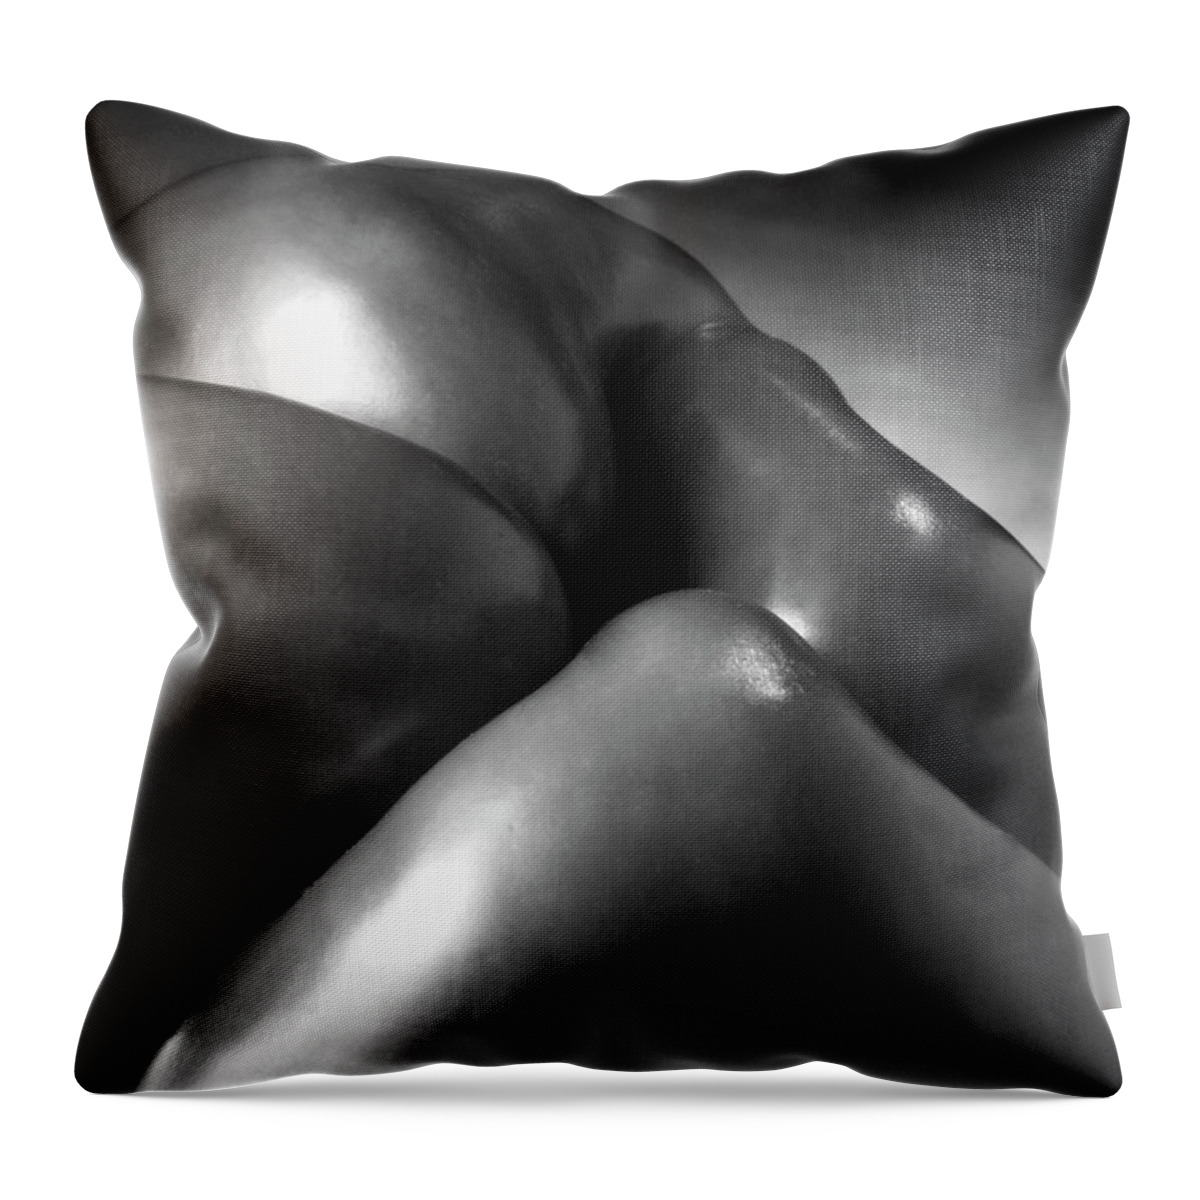 Black & White Throw Pillow featuring the photograph Knees and Elbows by Frederic A Reinecke